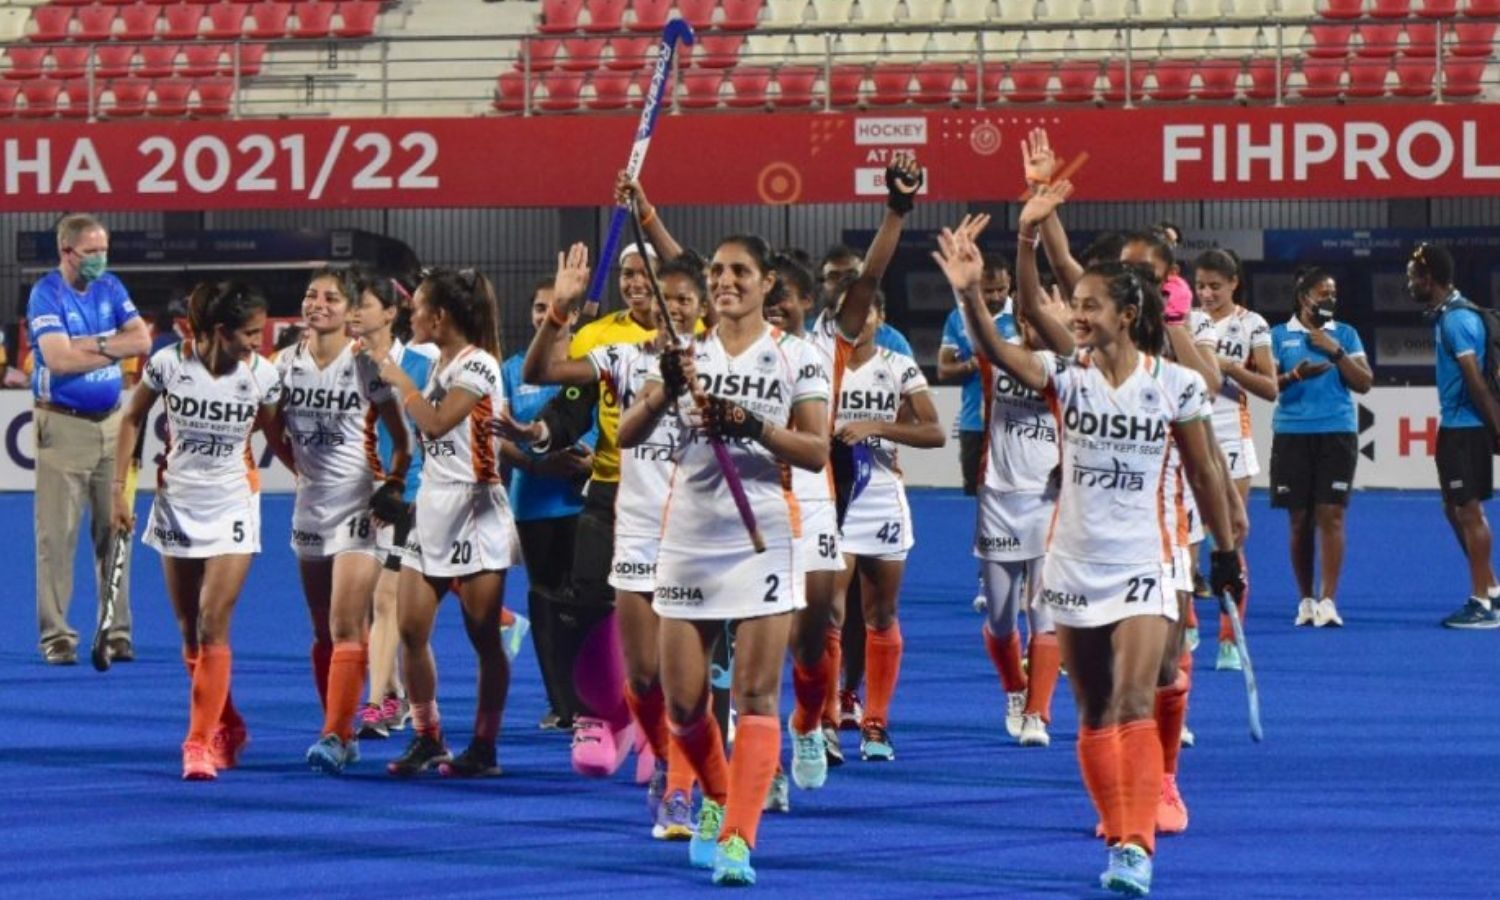 India vs Netherlands, Womens Pro Hockey League 2021/22 All you need to know, Indian Squad, Live Stream